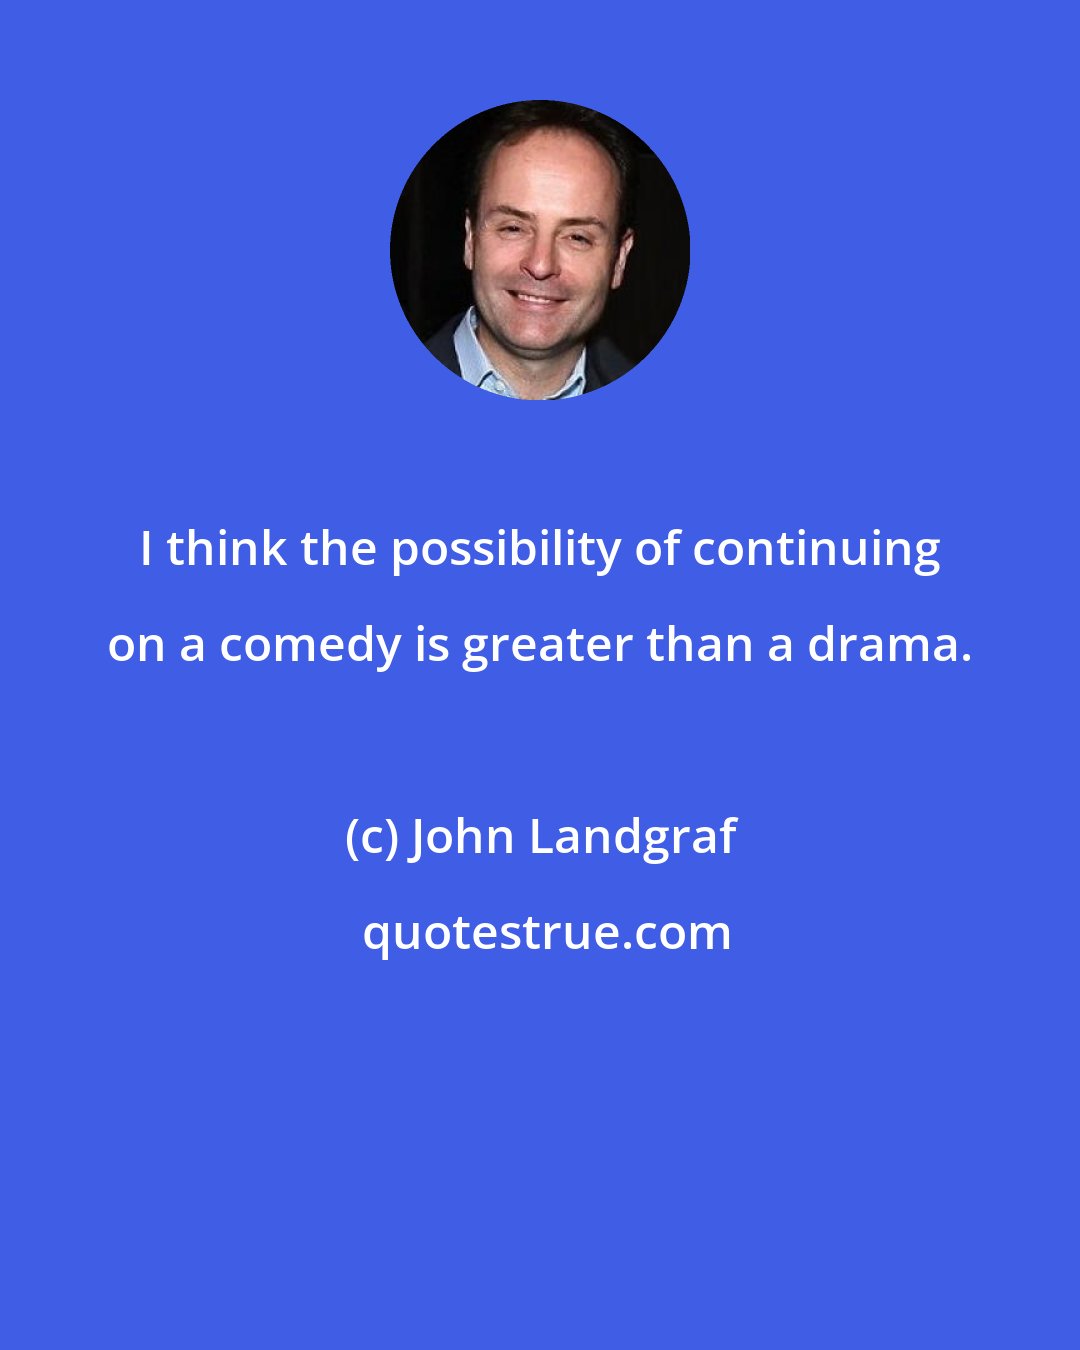 John Landgraf: I think the possibility of continuing on a comedy is greater than a drama.